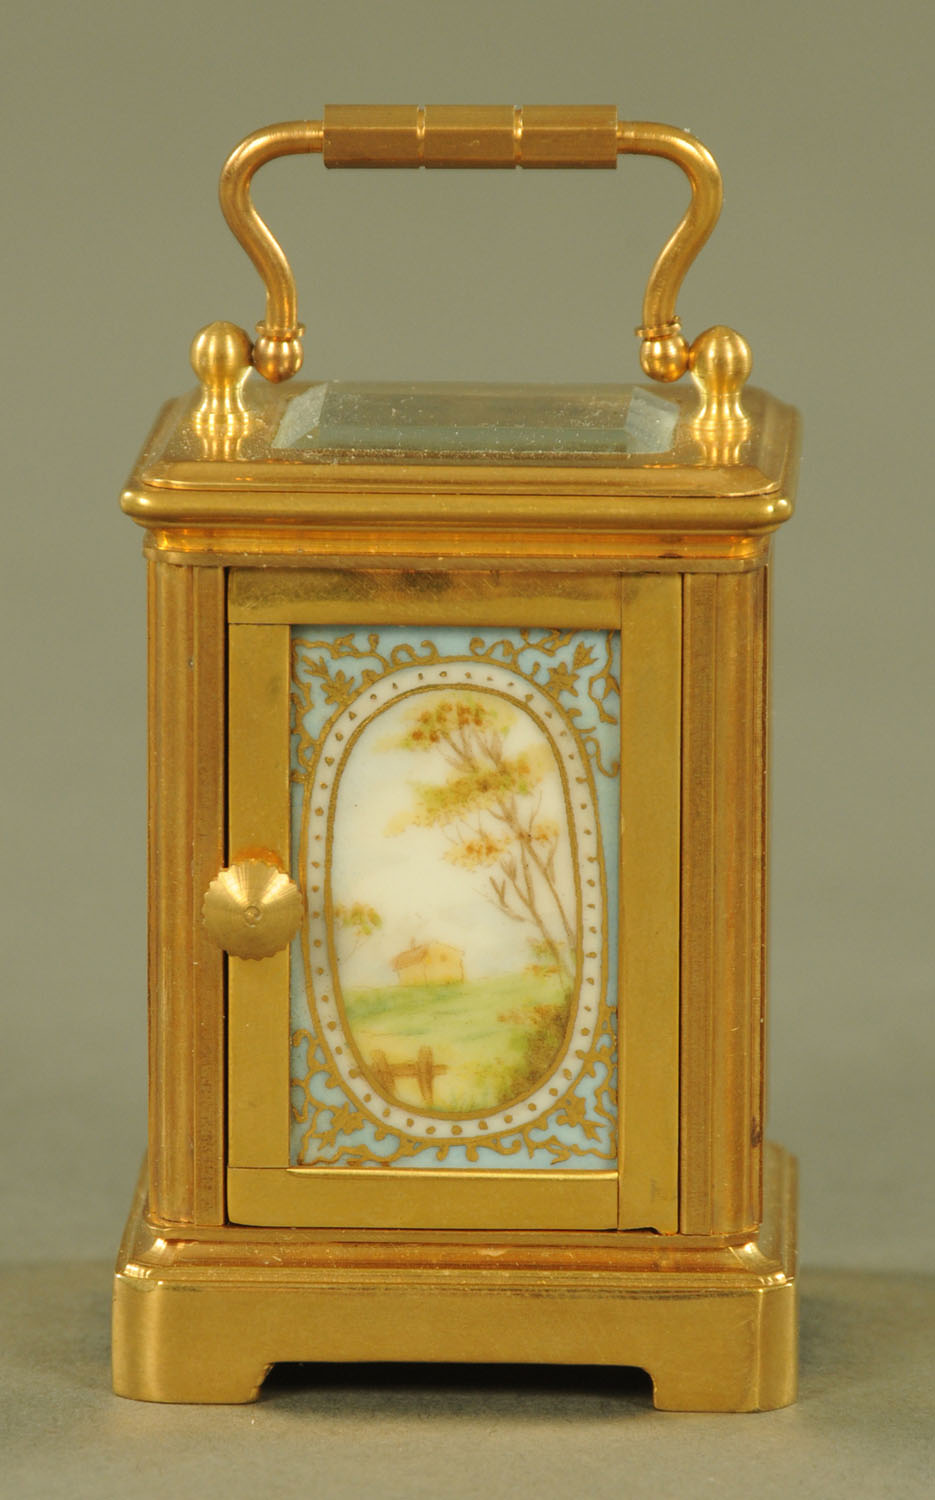 A miniature brass carriage clock, with porcelain panels, timepiece only. - Image 3 of 6